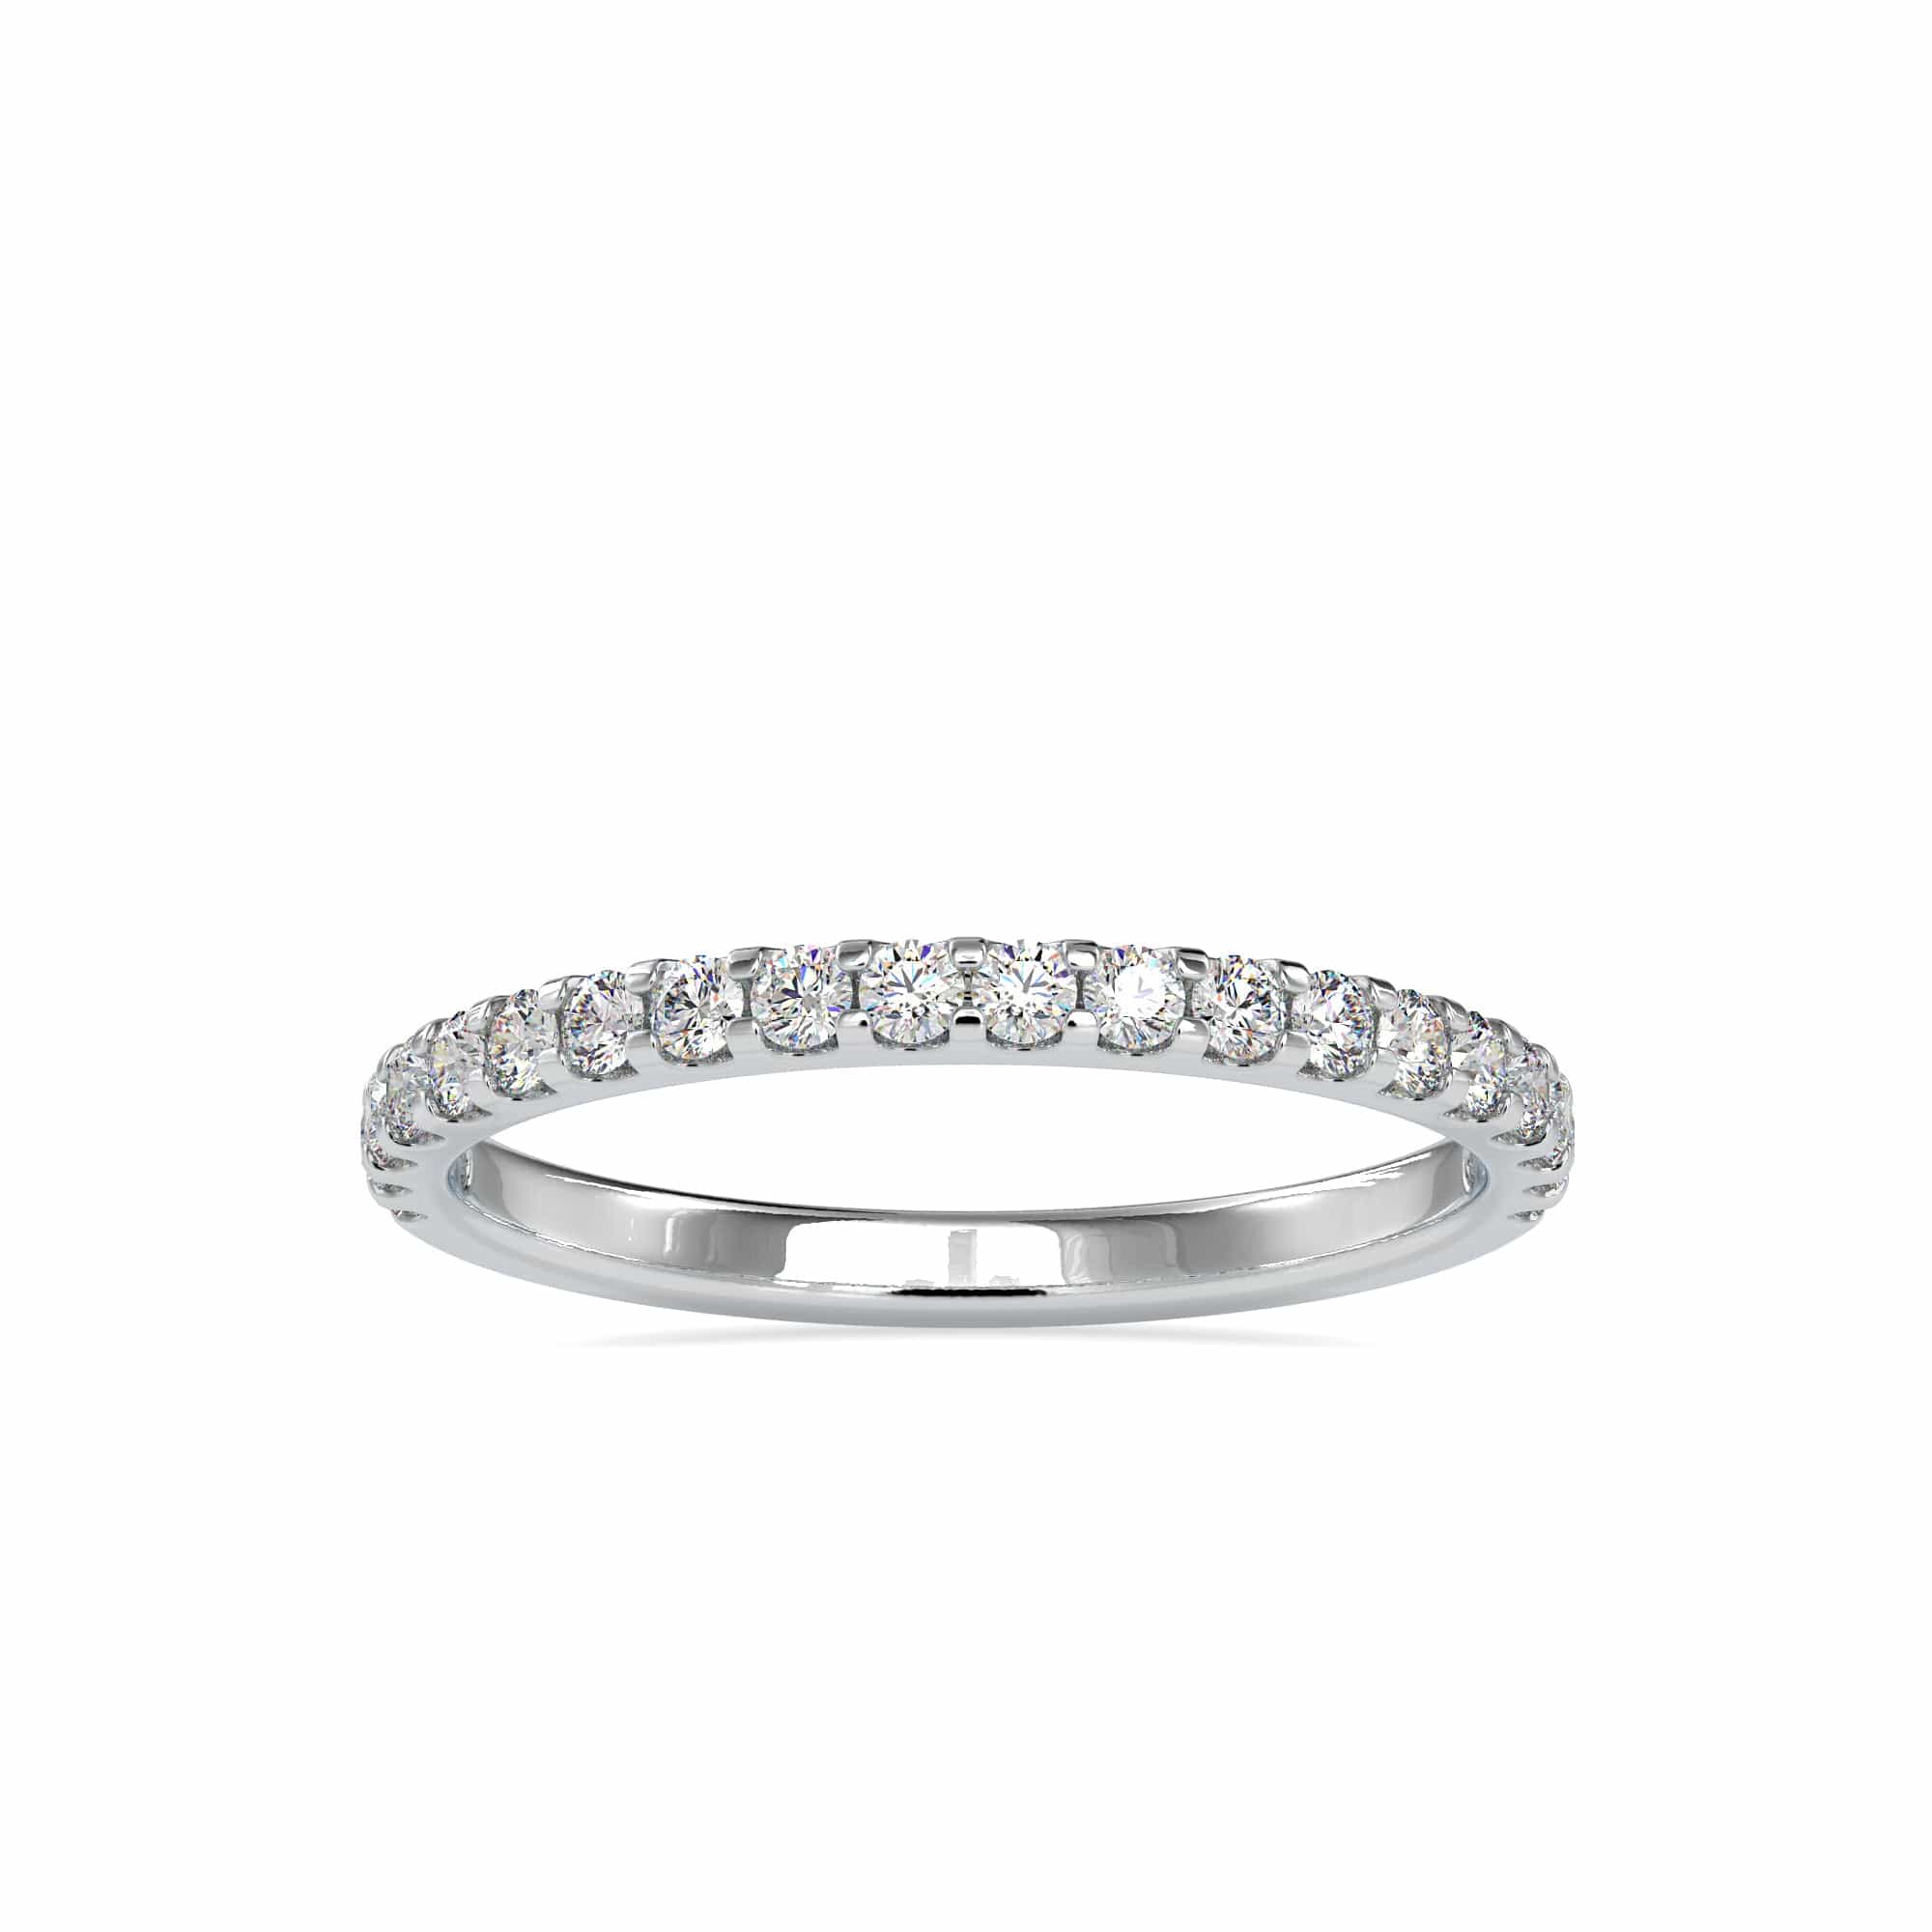 What Is An Eternity Ring? | Diamond Mansion